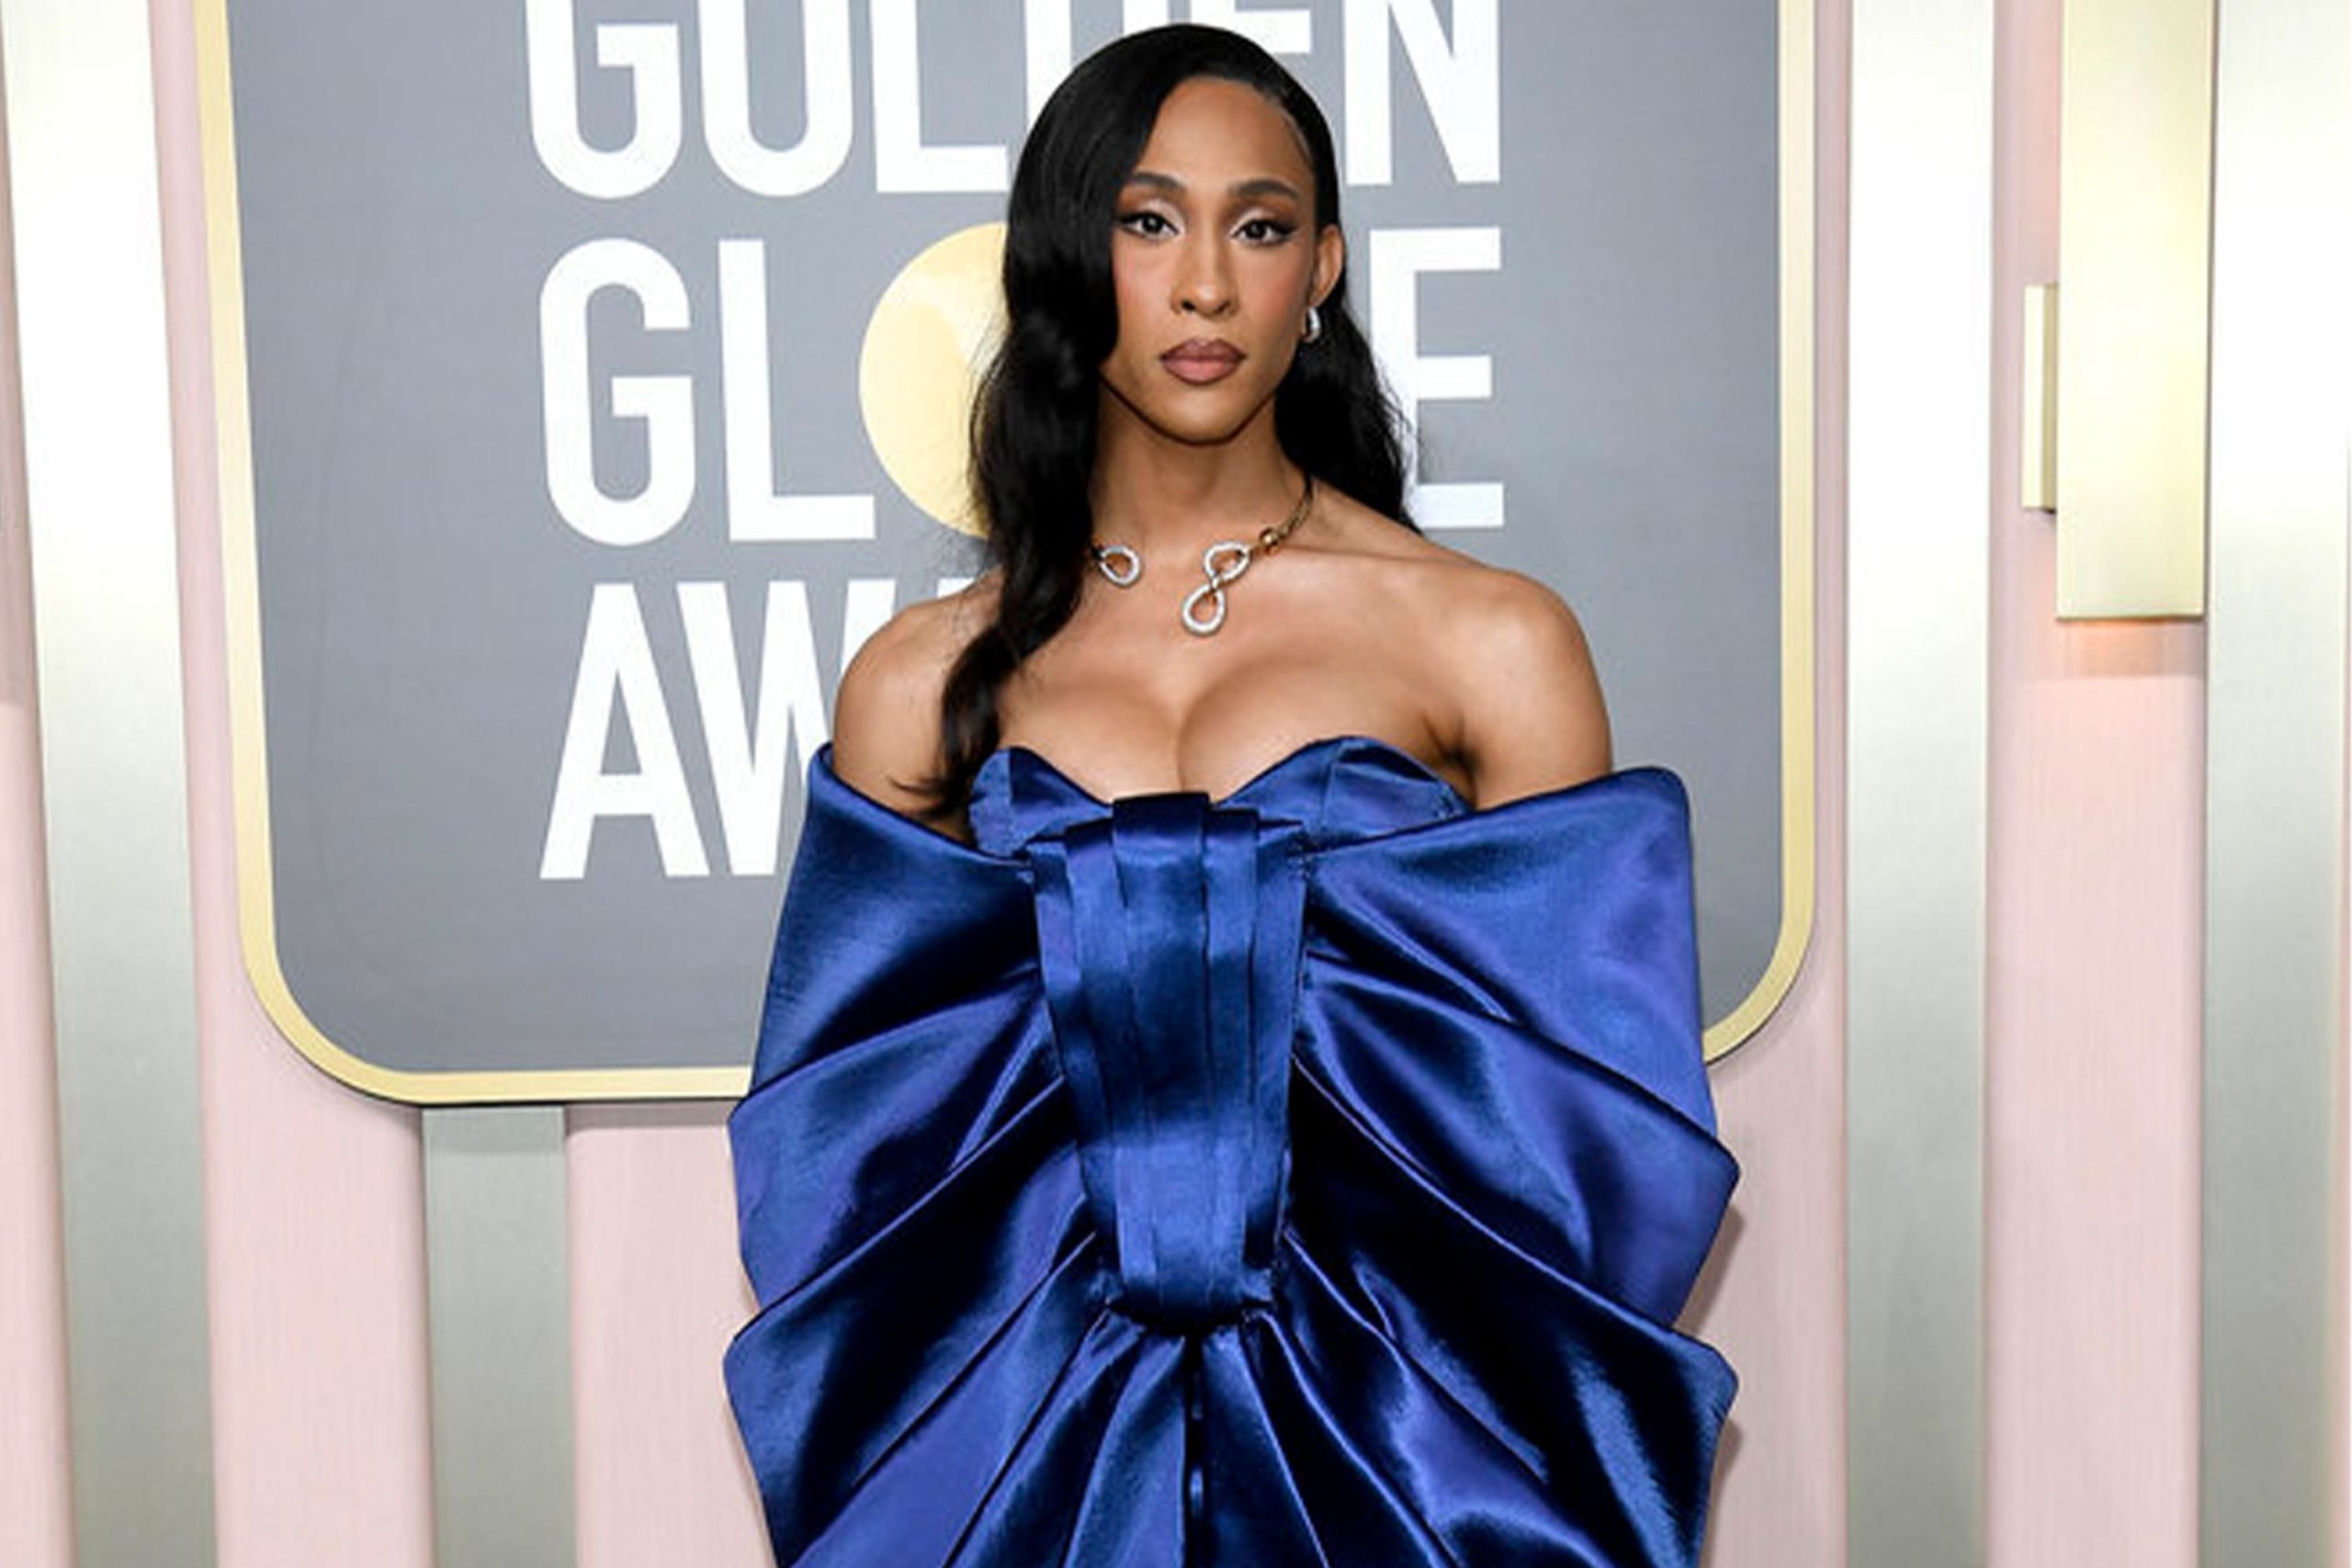 Oscars 2023 Red Carpet Best Looks, Fashion Highlights